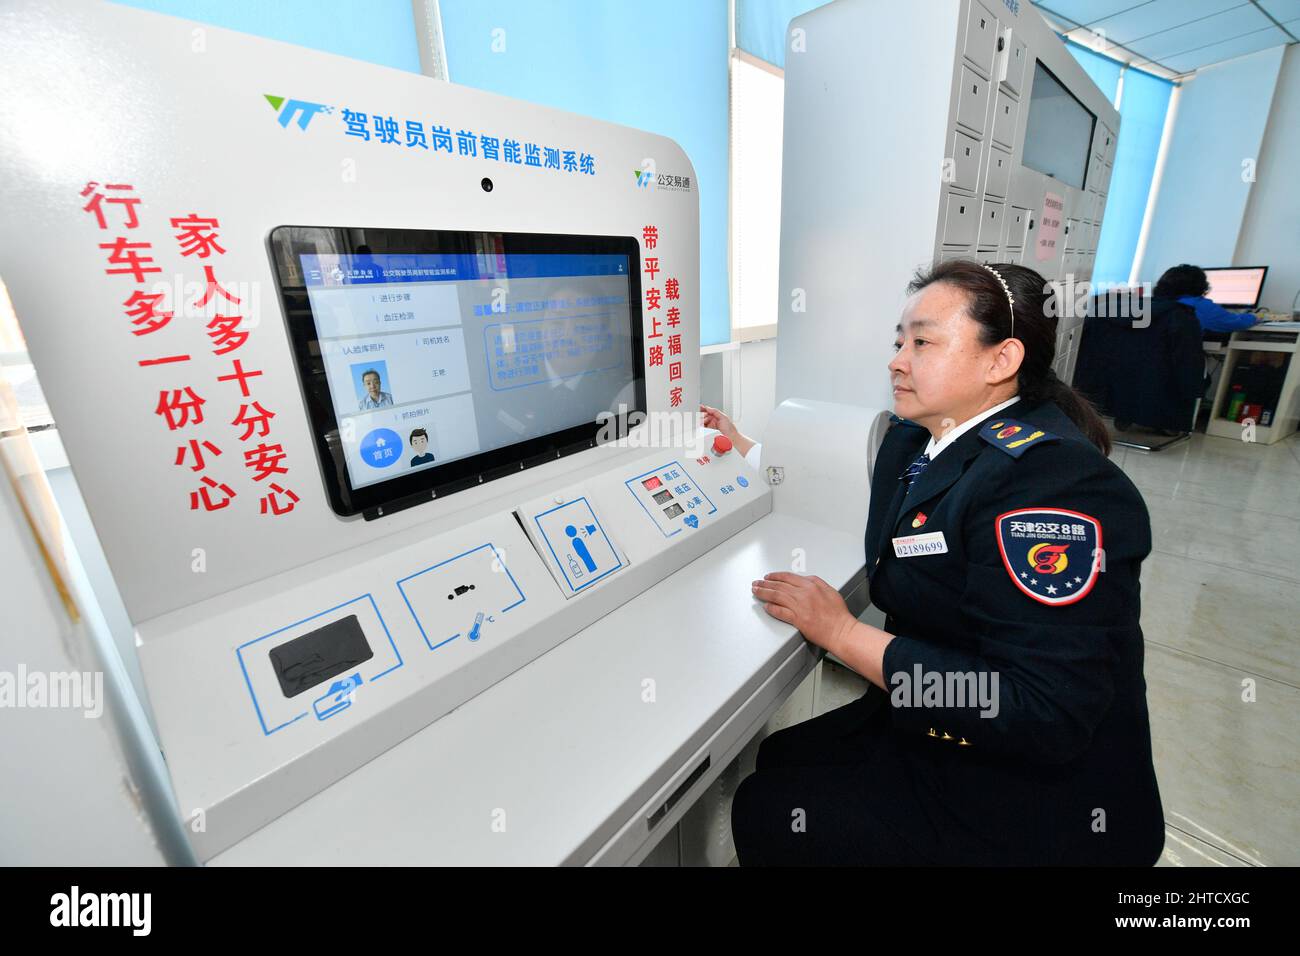 (220228) -- TIANJIN, Feb. 28, 2022 (Xinhua) -- Wang Yan checks her blood pressure before starting her shift at a bus service office in north China's Tianjin, Feb. 24, 2022. Tianjin bus driver Wang Yan is a National People's Congress (NPC) deputy. Since taking on her duties in 2018, Wang has continued to submit suggestions to the NPC, covering a variety of areas, such as transportation and health care. As a bus driver, she makes the most of her job, listening to her passengers' opinions, while formulating suggestions that can have an influence on government policies. This year is the last Stock Photo